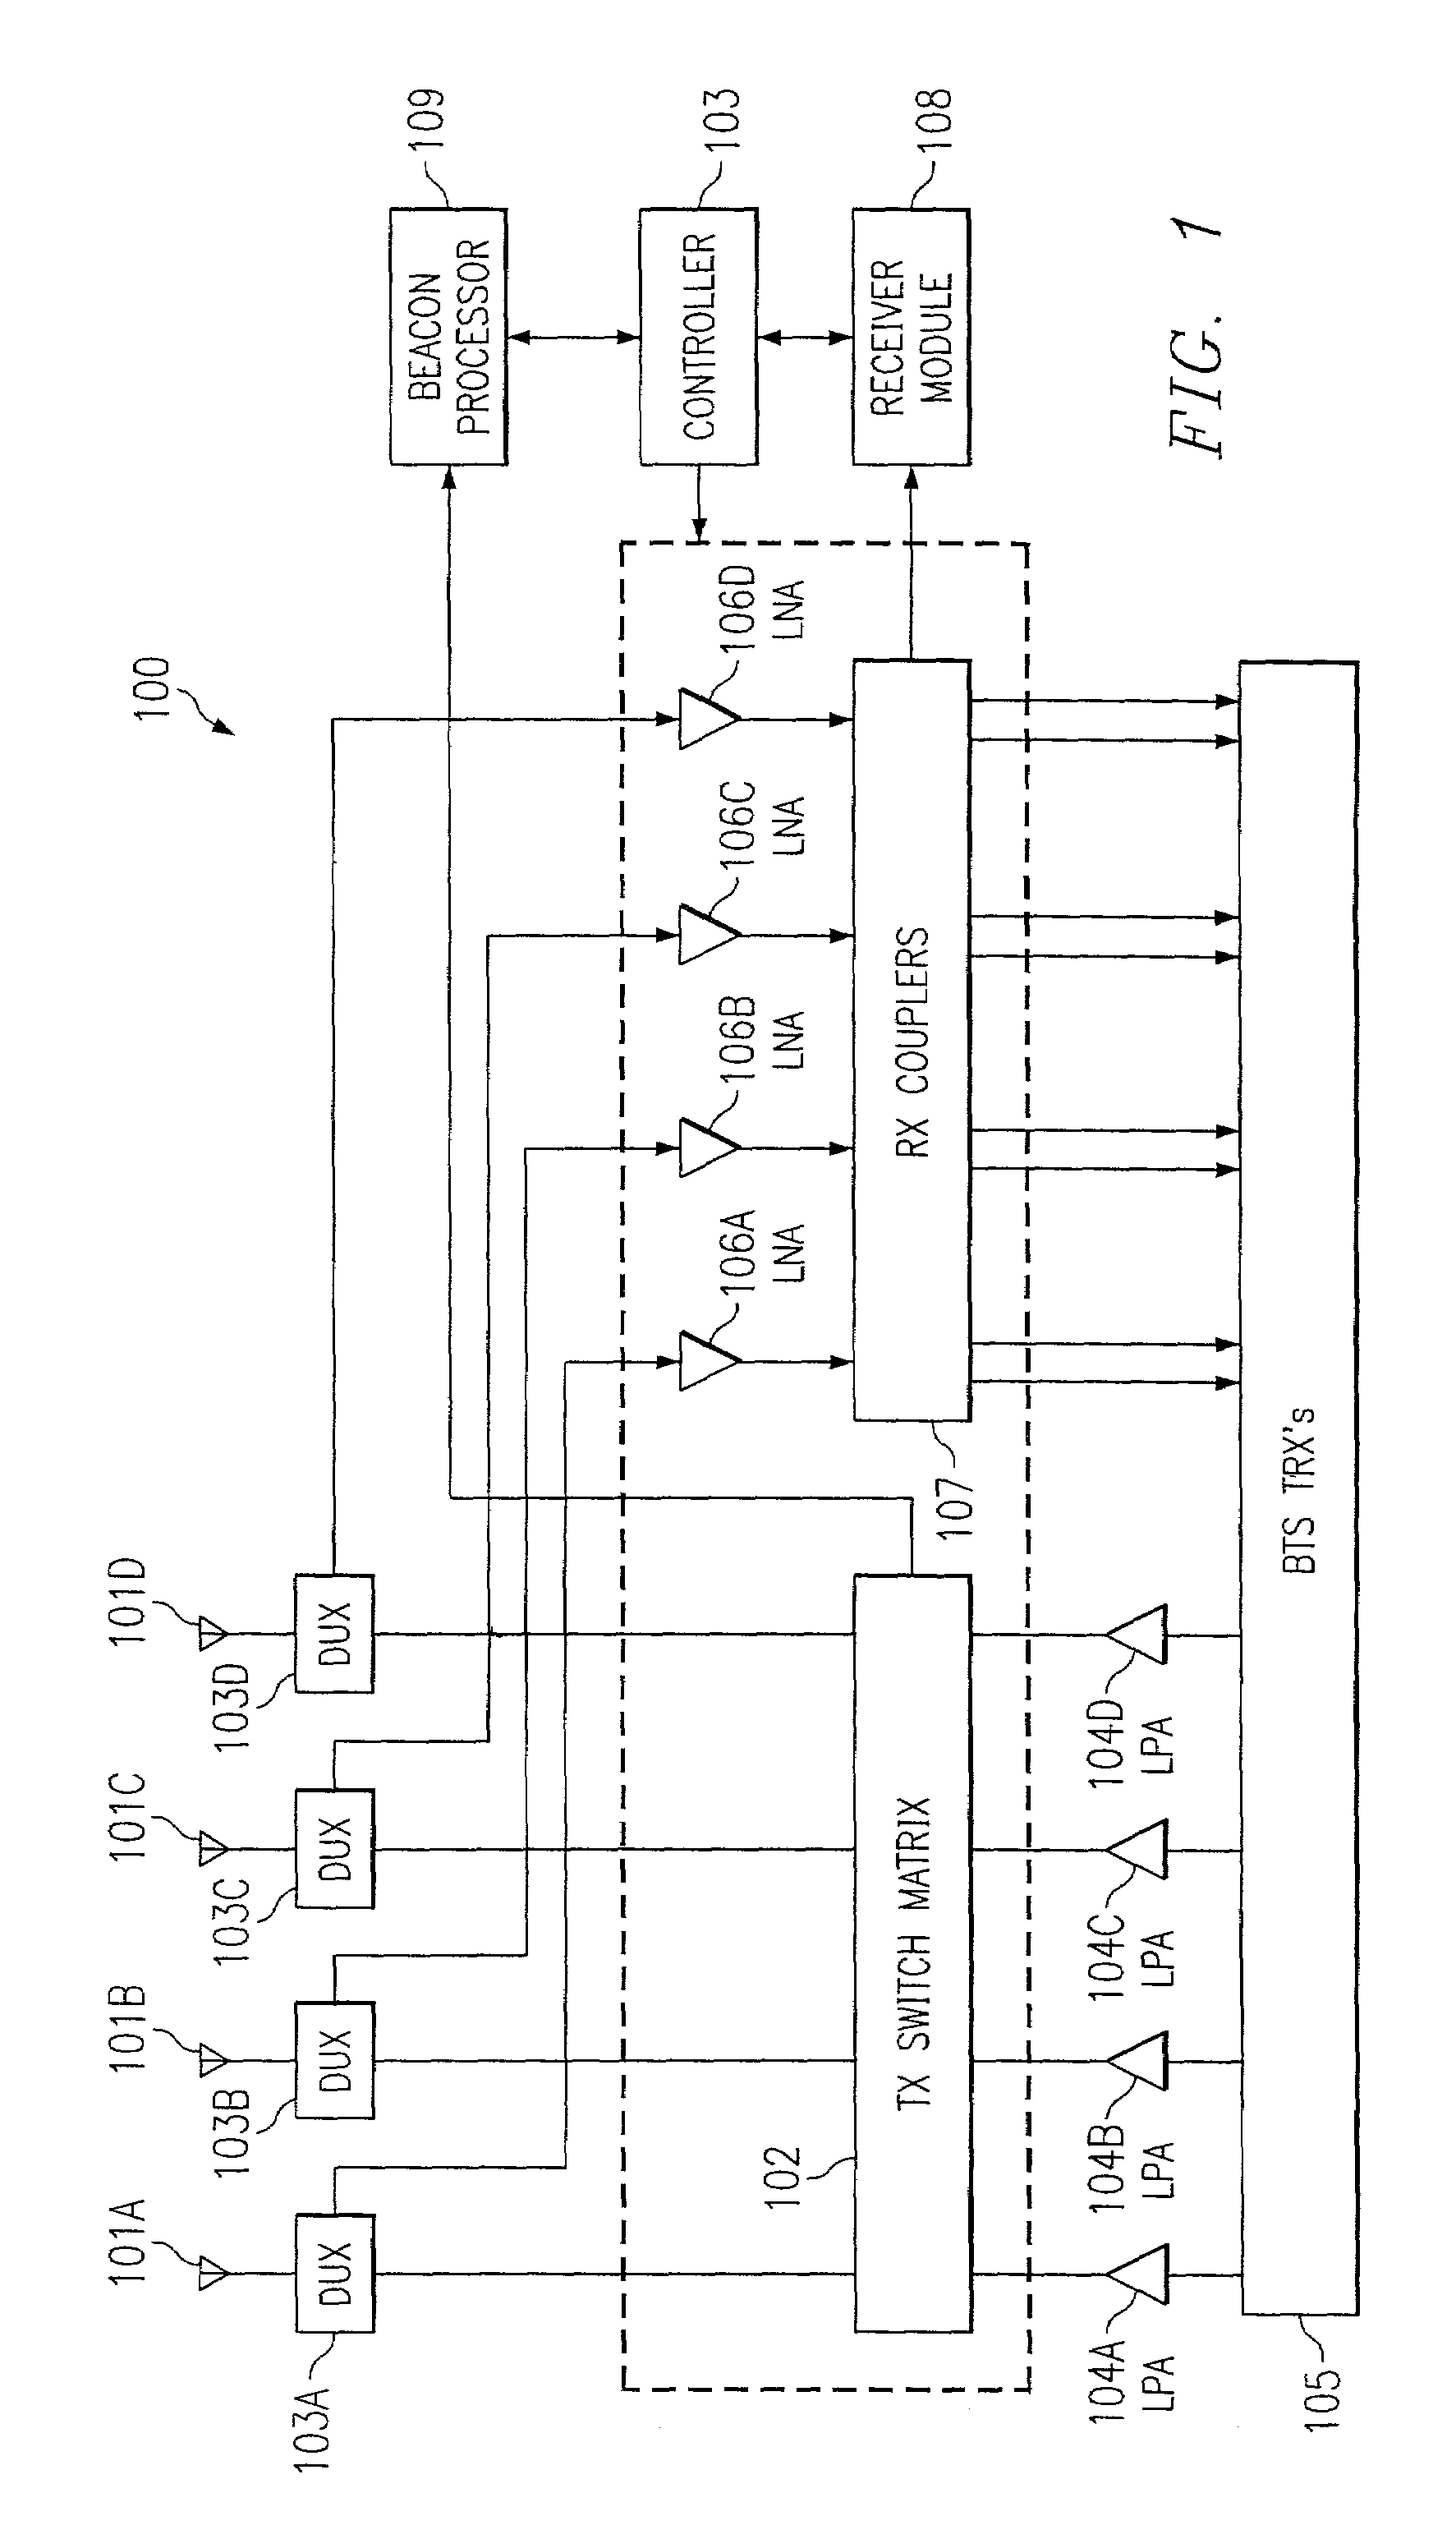 Systems and methods for providing improved wireless signal quality using diverse antenna beams